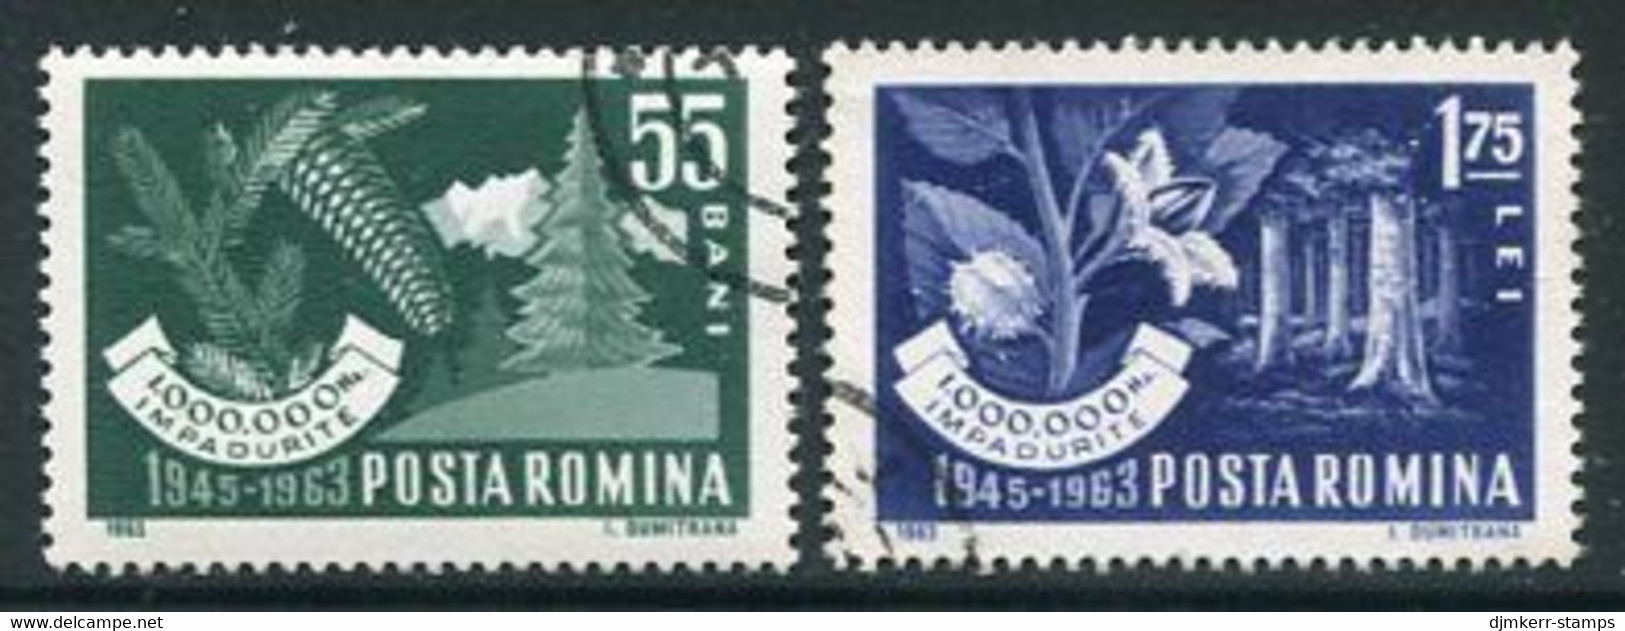 ROMANIA 1963 Forestry Used.  Michel 2212-13 - Oblitérés